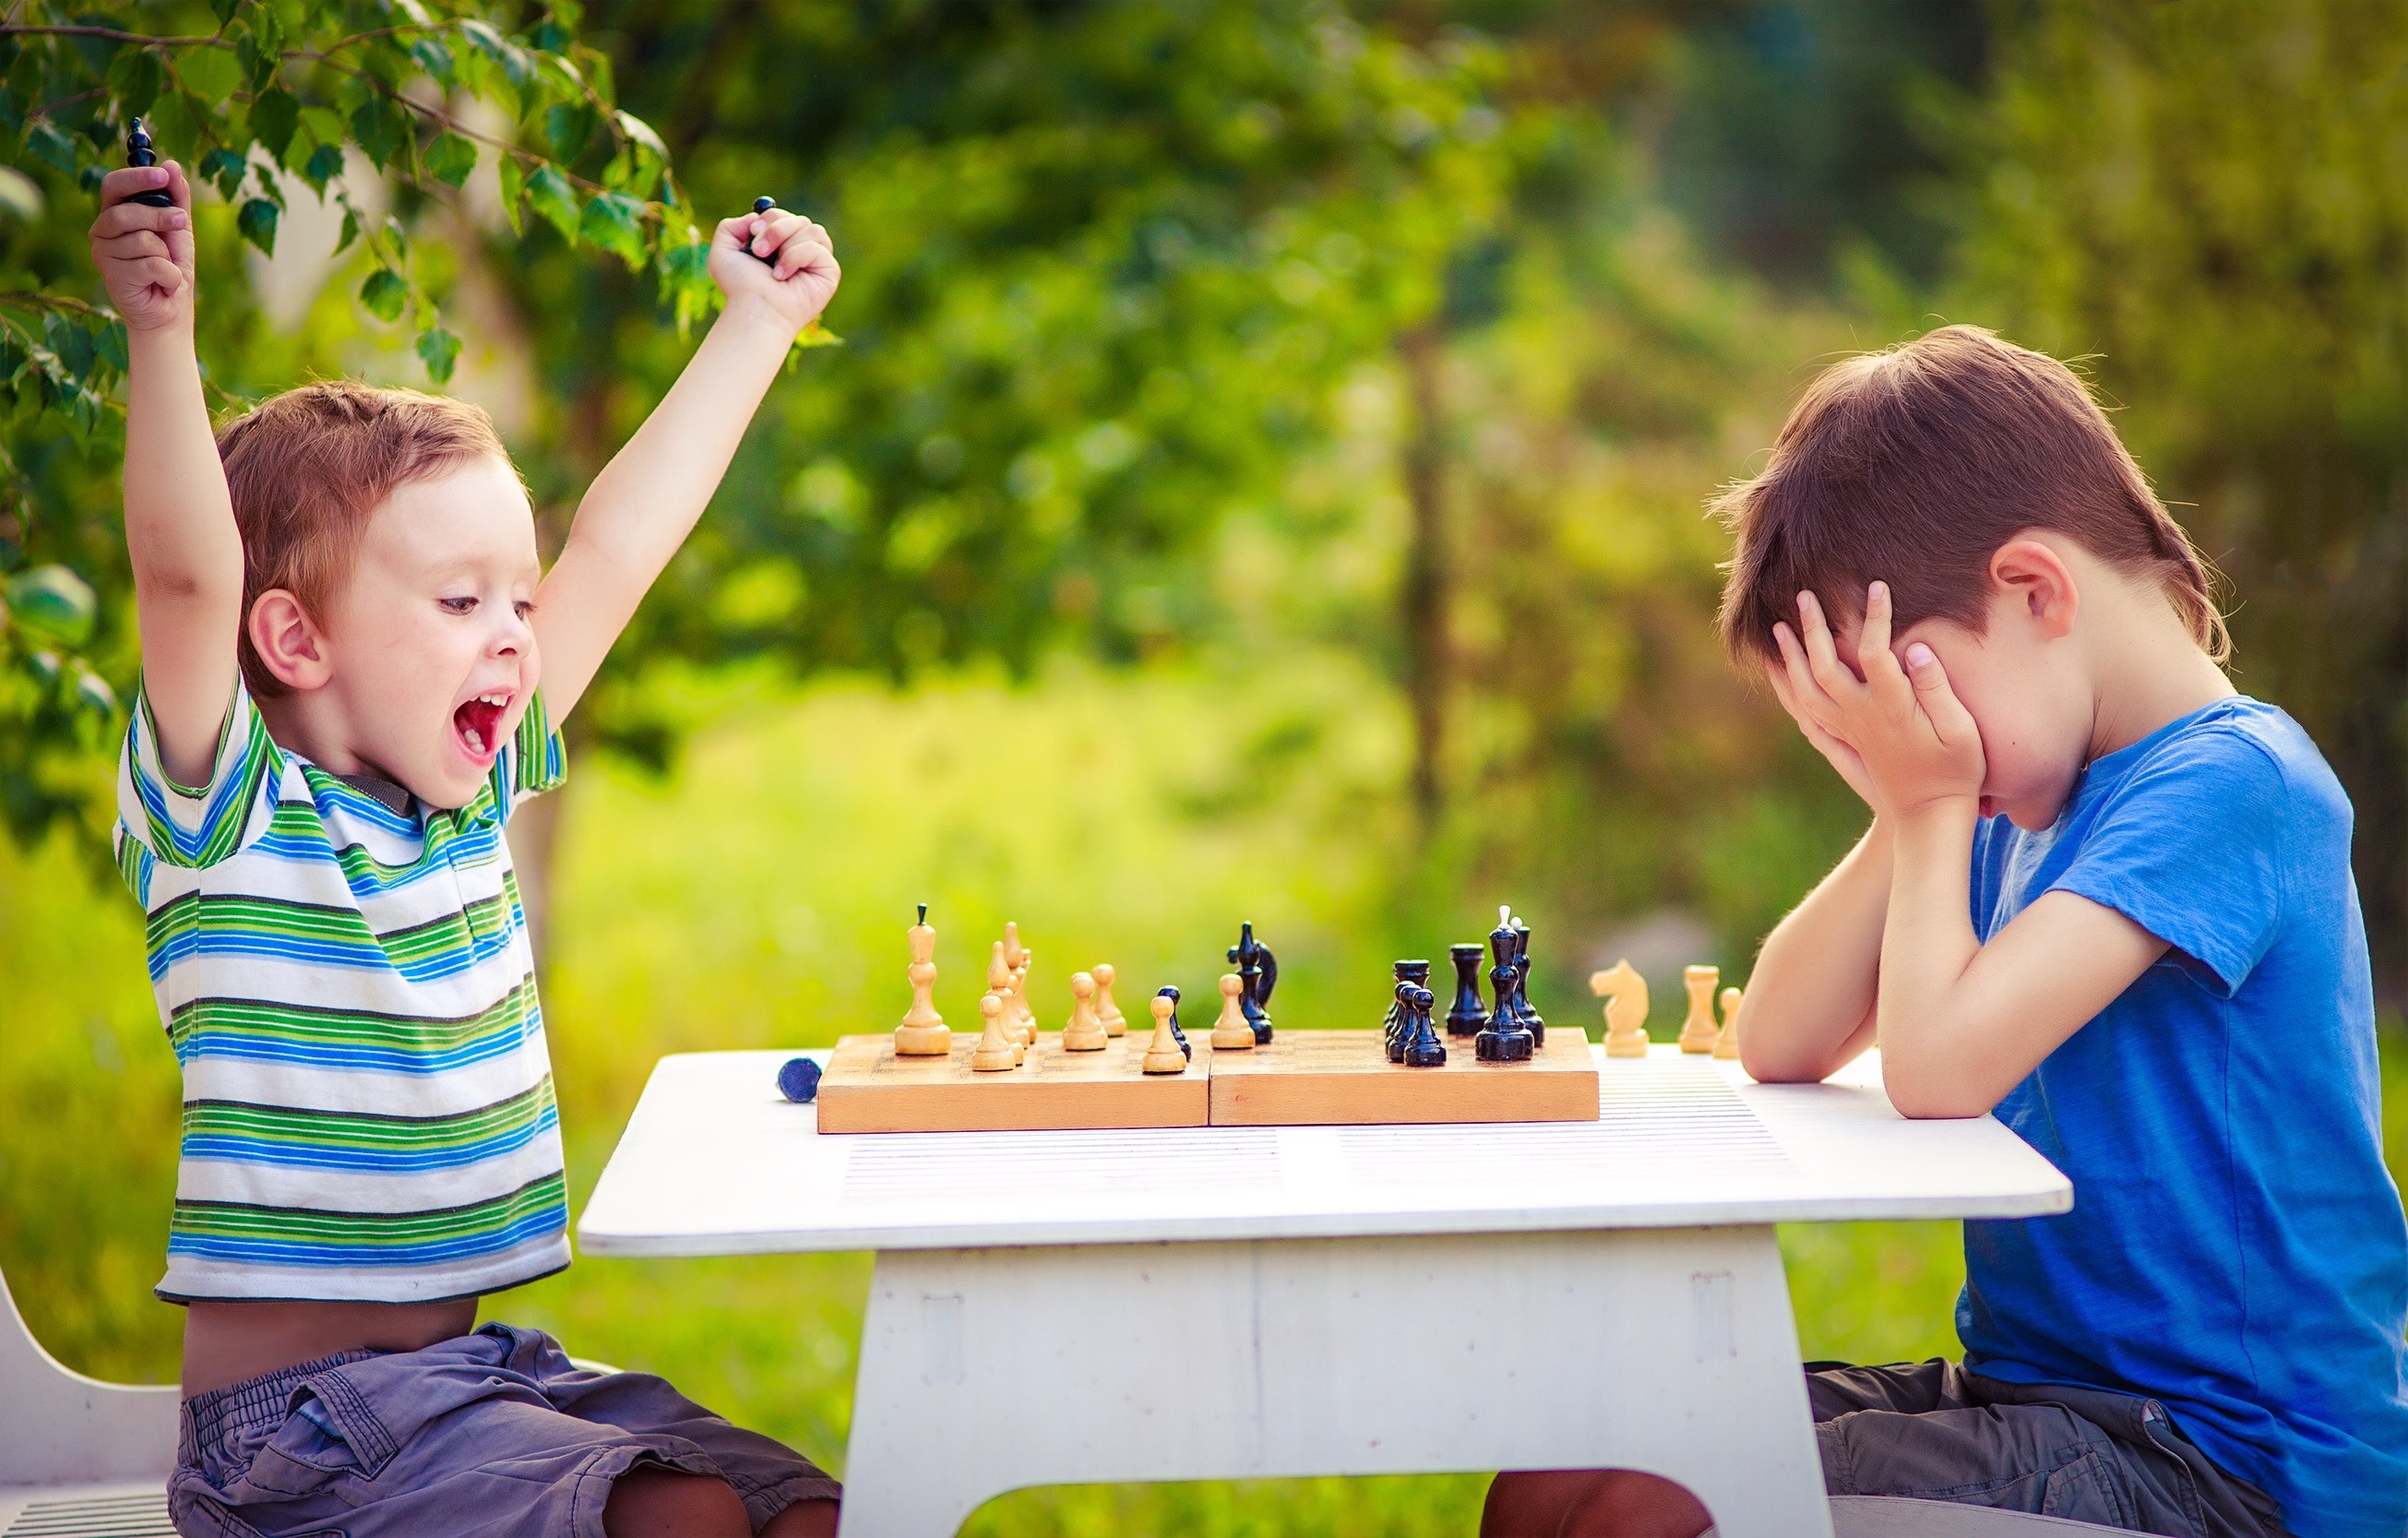 vivid emotions after the game of chess. two young chess players outdoors. boy rejoices won a game of chess. sad opponent covered his face, and upset losing